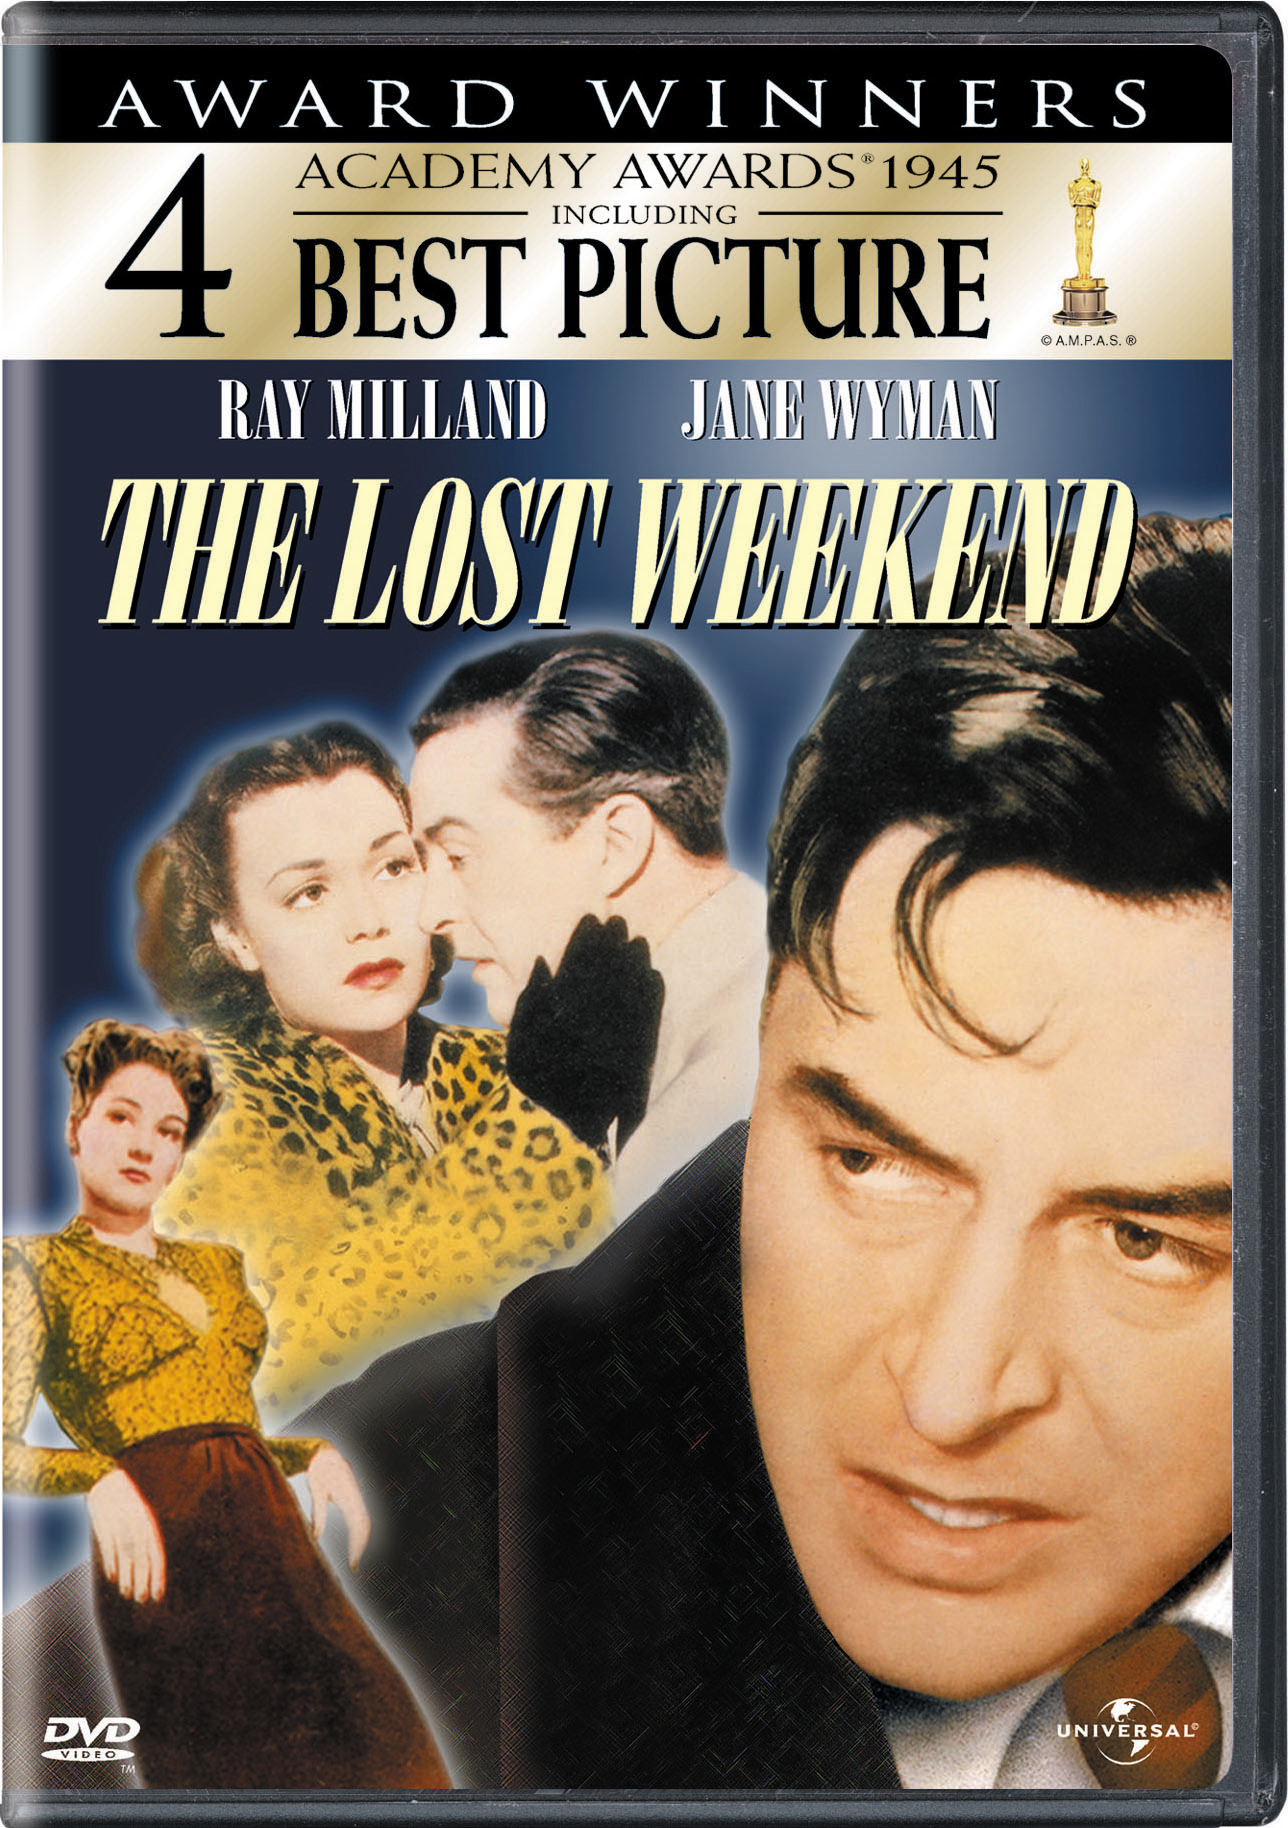 The Lost Weekend (DVD Full Screen) - DVD [ 1945 ]  - Classic Movies On DVD - Movies On GRUV